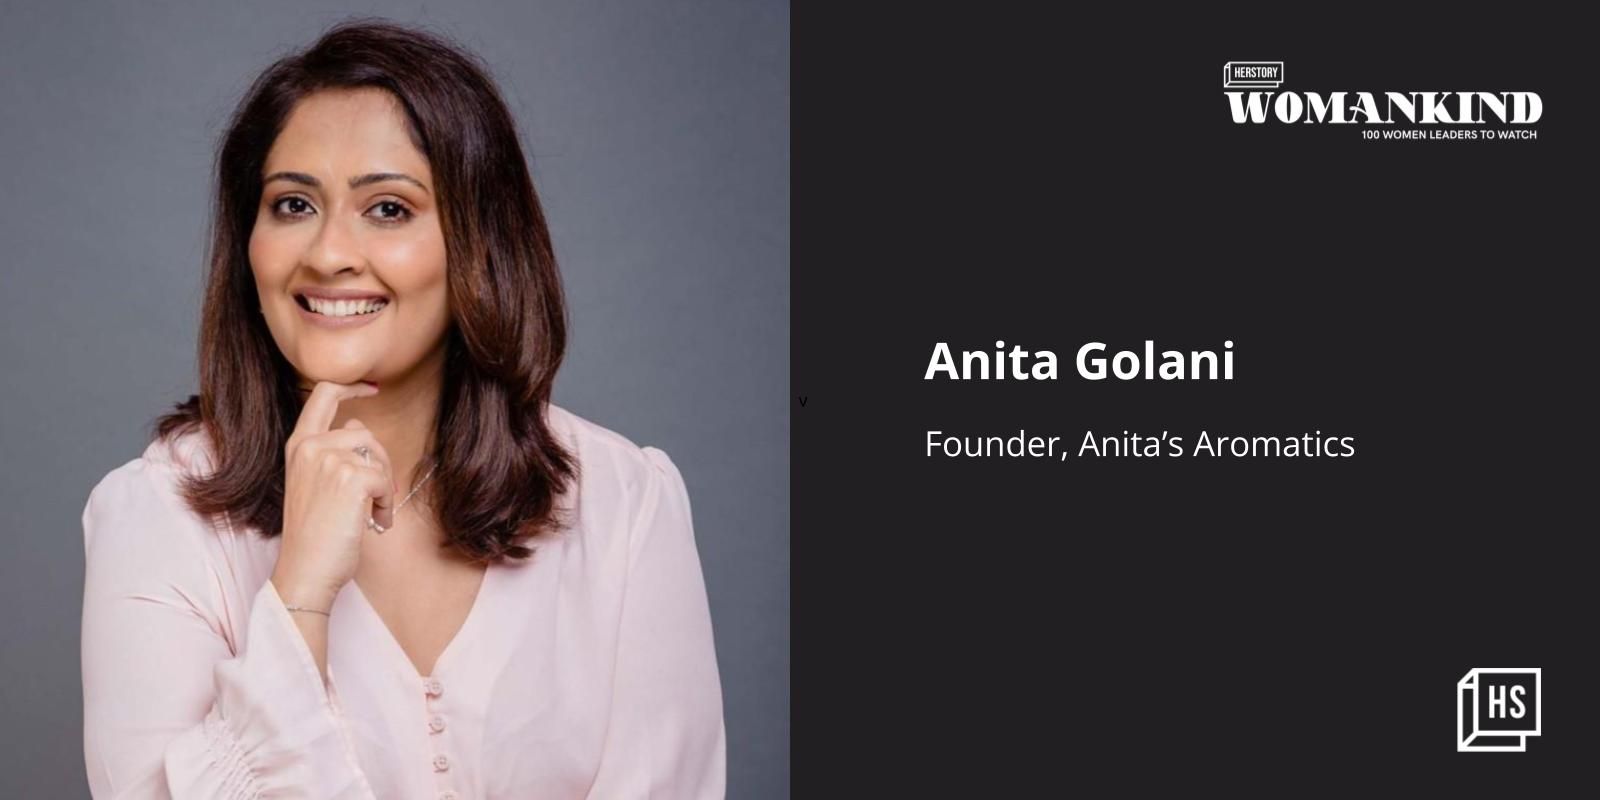 [100 Emerging Women Leaders] Anita Golani is on a mission to infuse wellness with aromatherapy-inspired skincare line